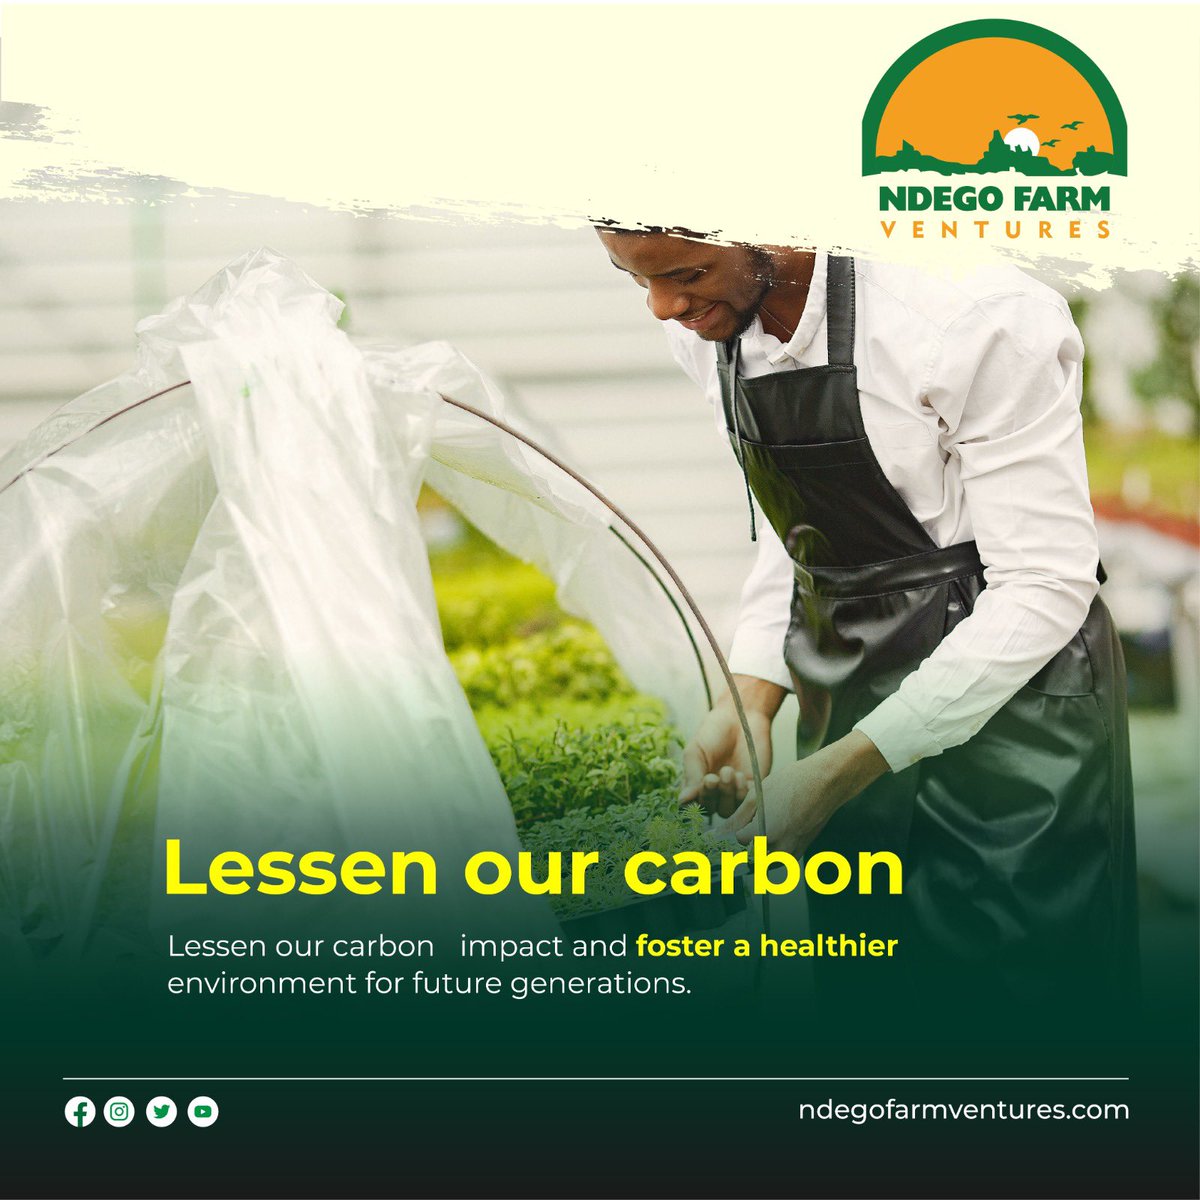 🌱Did you know that #greenhousefarming has a significantly lower carbon impact compared to traditional farming methods? By optimizing resources like water & energy, greenhouse farming helps reduce greenhouse gas emissions. #RwOT #SustainableAgriculture #ReduceCarbonFootprint